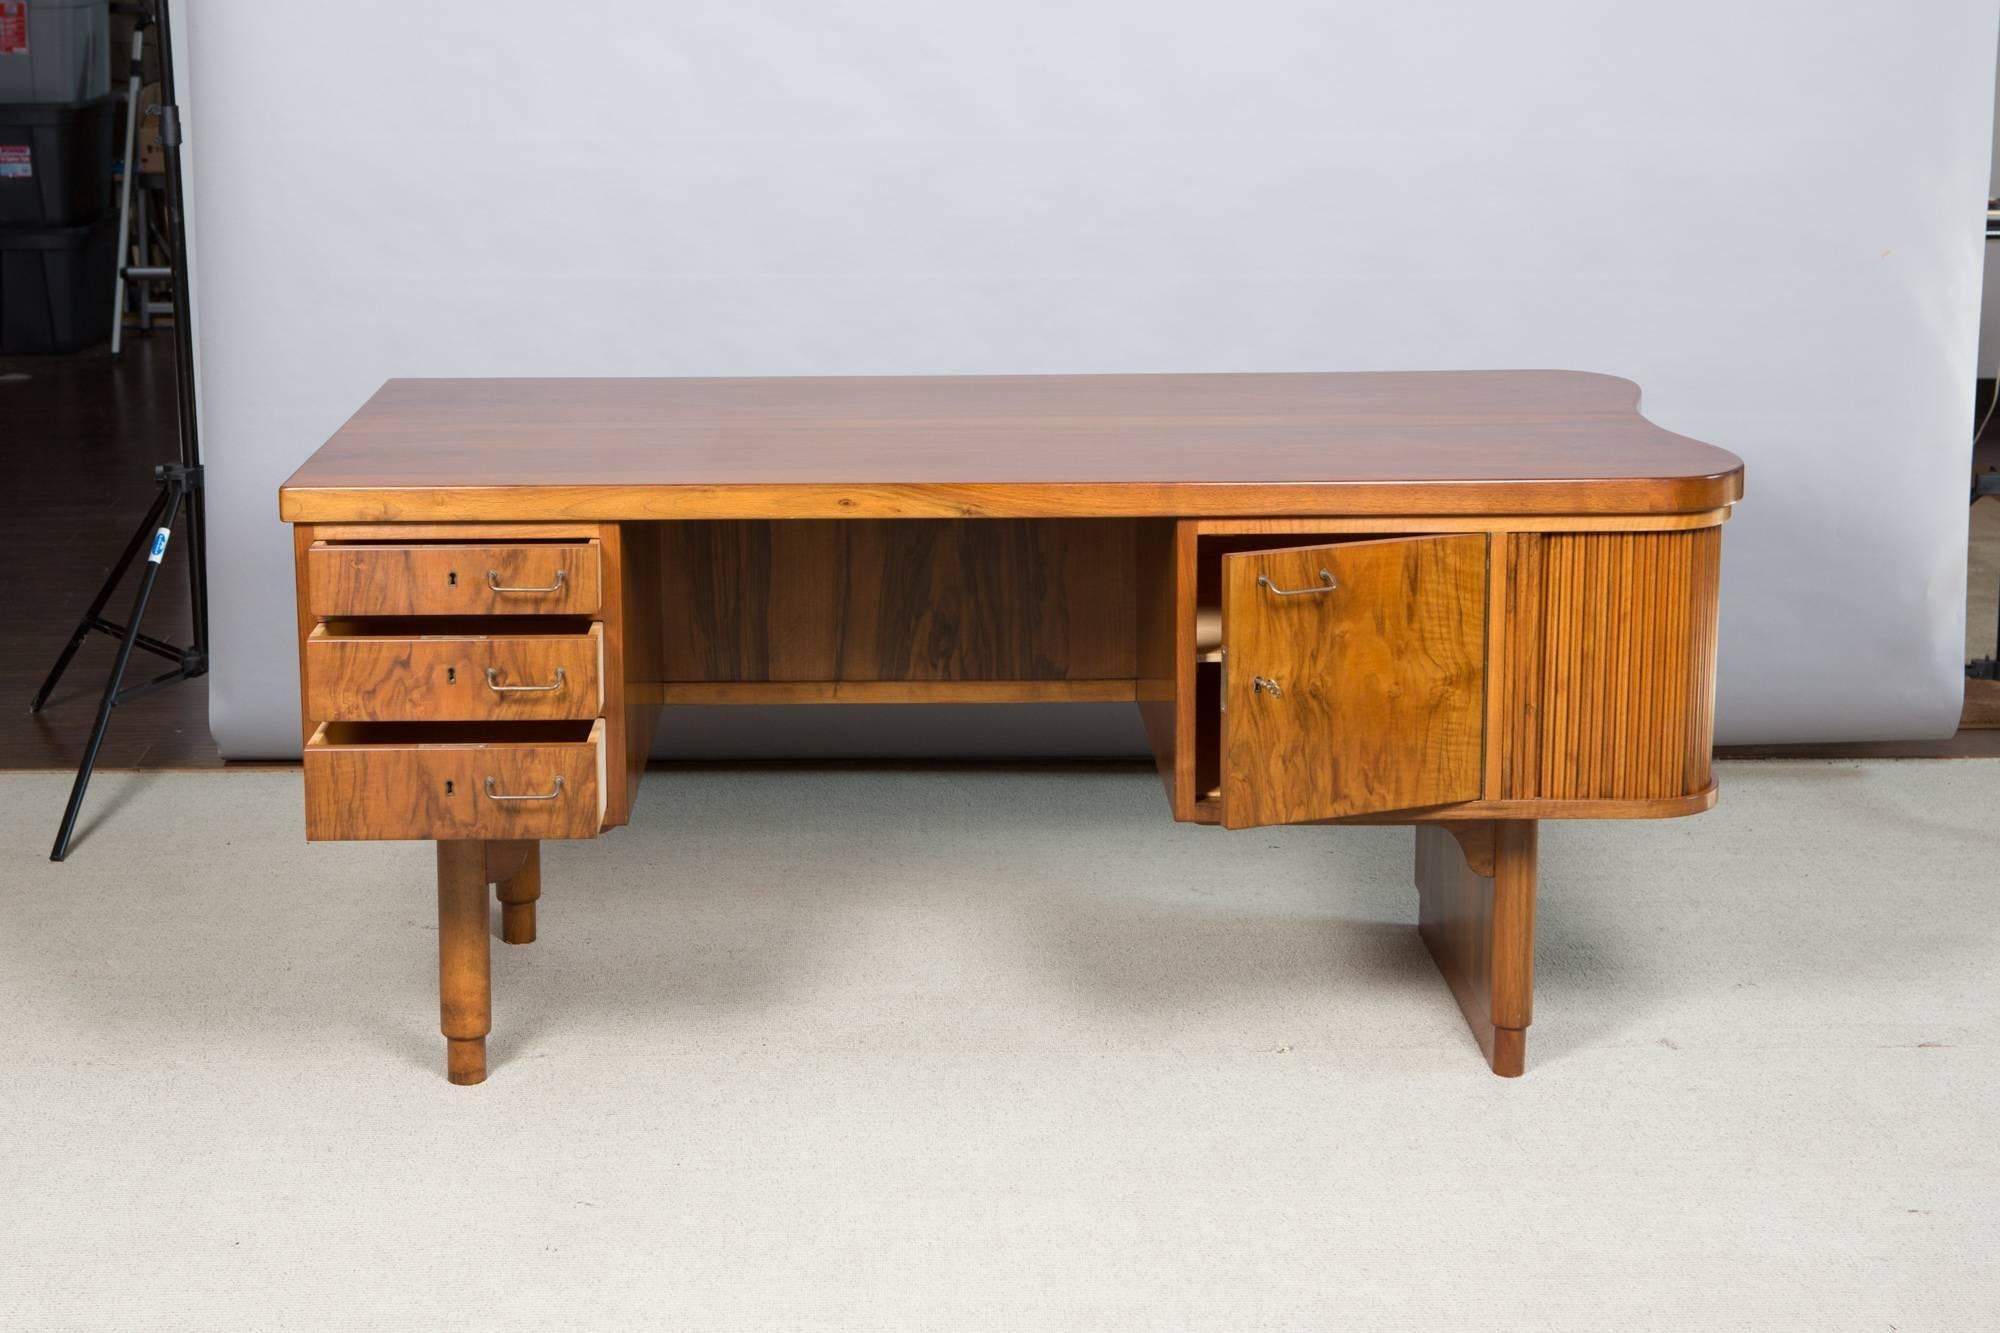 Beautiful midcentury Danish desk with locking drawers, sliding tambour side doors and unique storage shelf on the front side of the desk that is great for books and display items. Great original condition. Includes key.